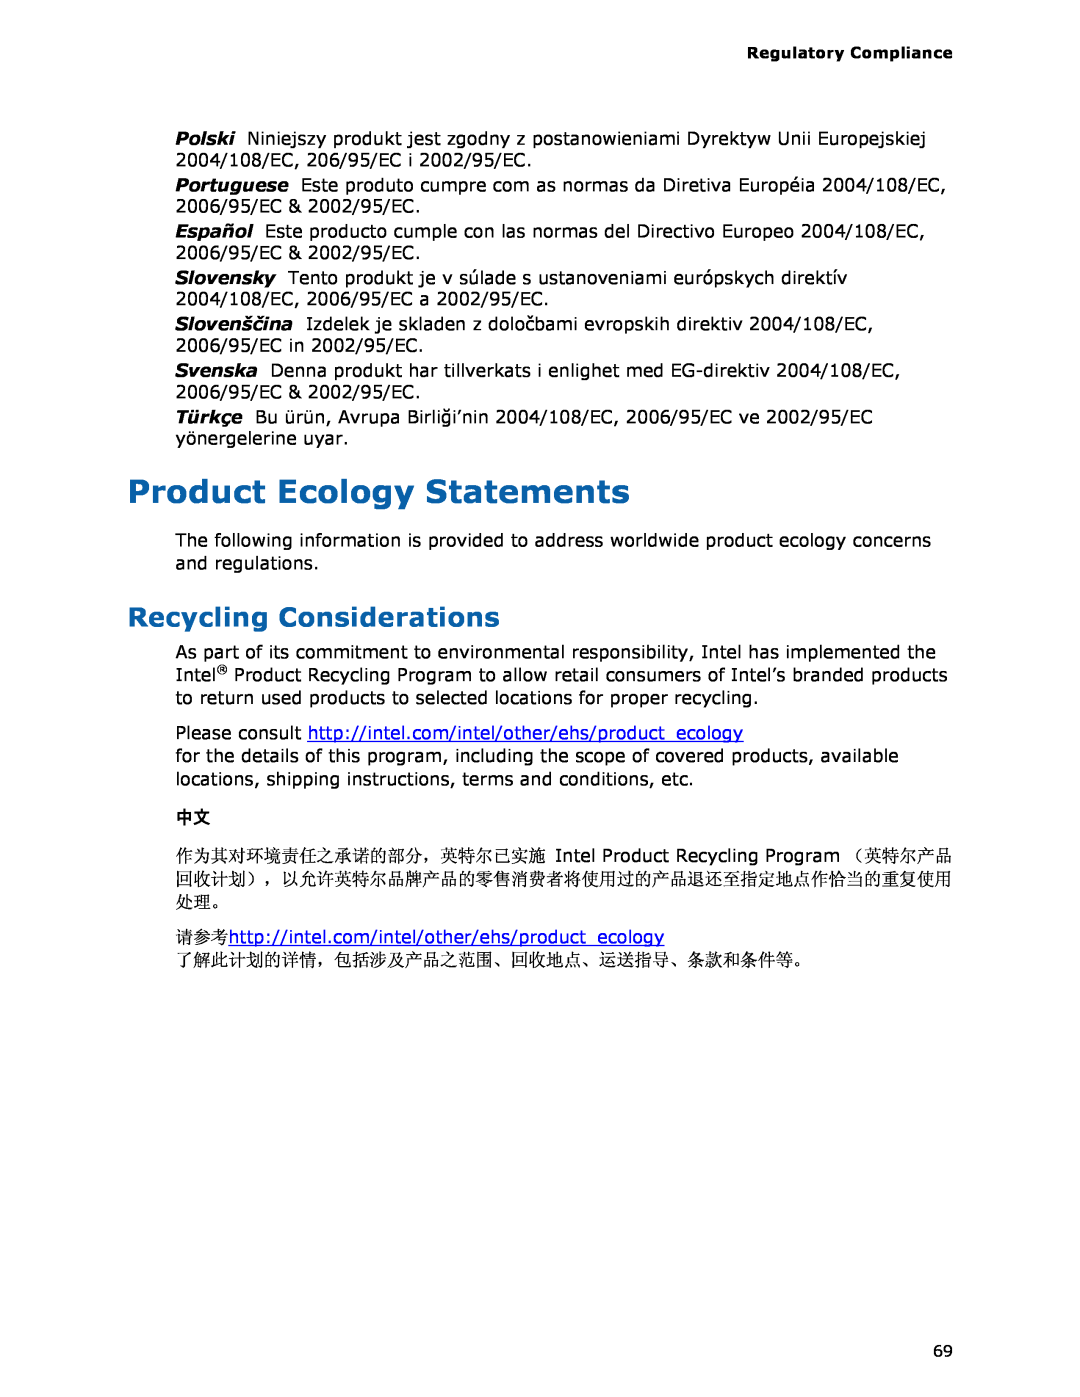 Intel DH67GD manual Product Ecology Statements, Recycling Considerations, 请参考http//intel.com/intel/other/ehs/productecology 